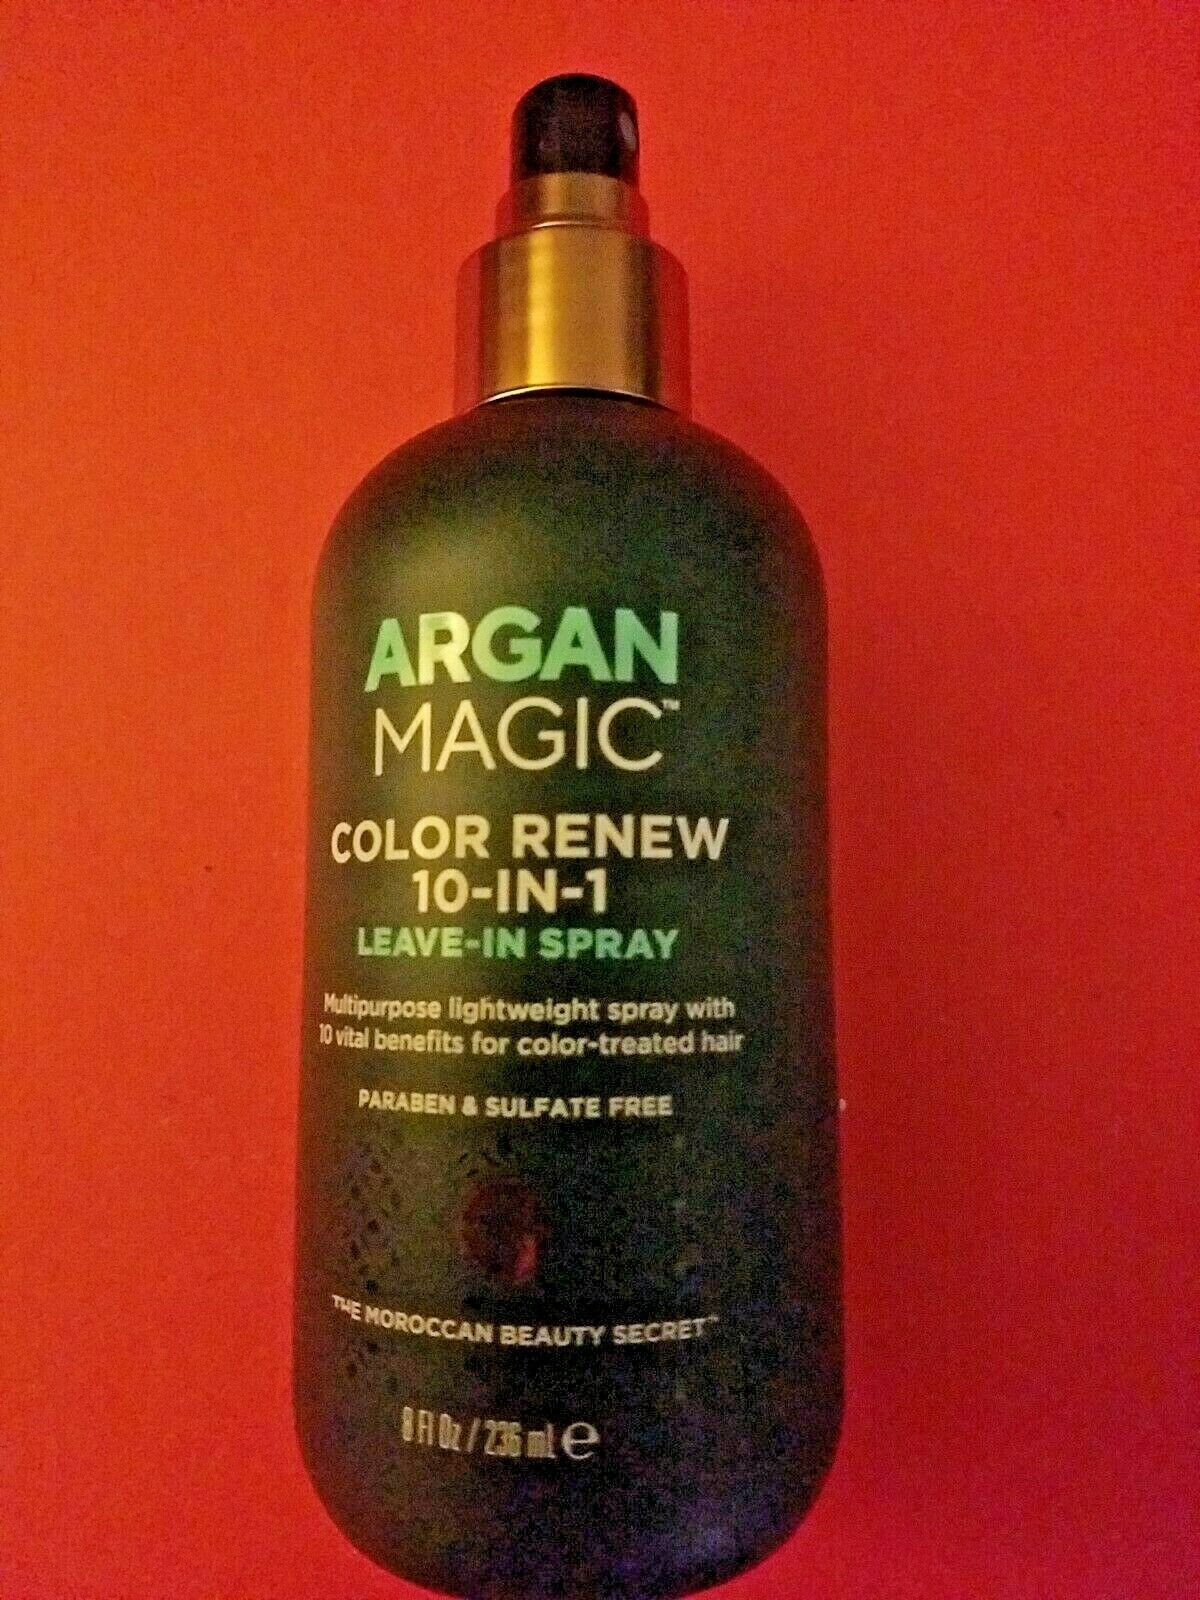 Primary image for ARGAN MAGIC COLOR RENEW 10 IN 1 LEAVE IN SPRAY PARABEN & SULFATE FREE